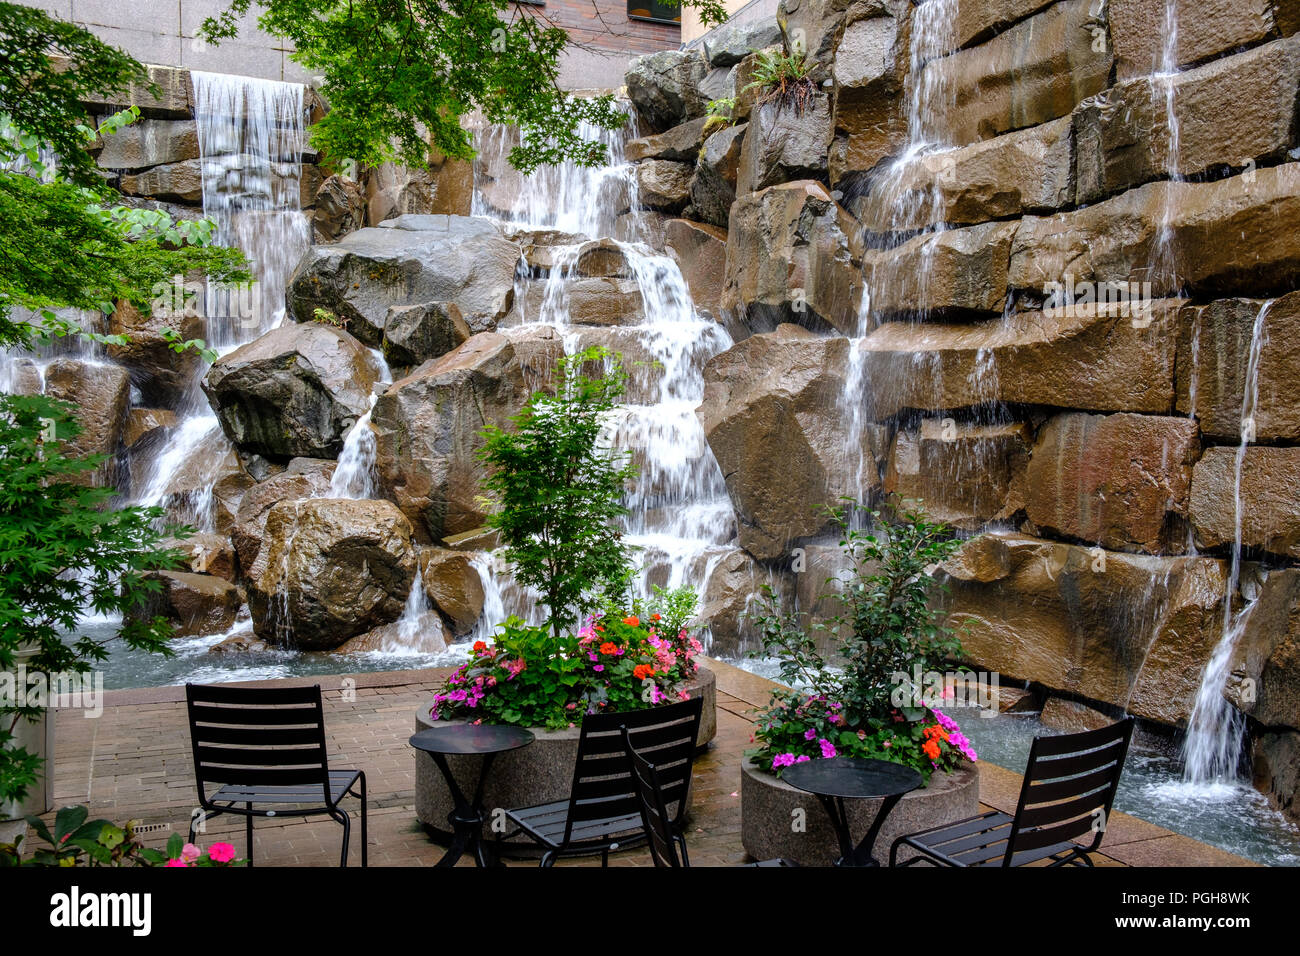 Waterfall Garden Park, Pioneer Square, Seattle, USA Banque D'Images